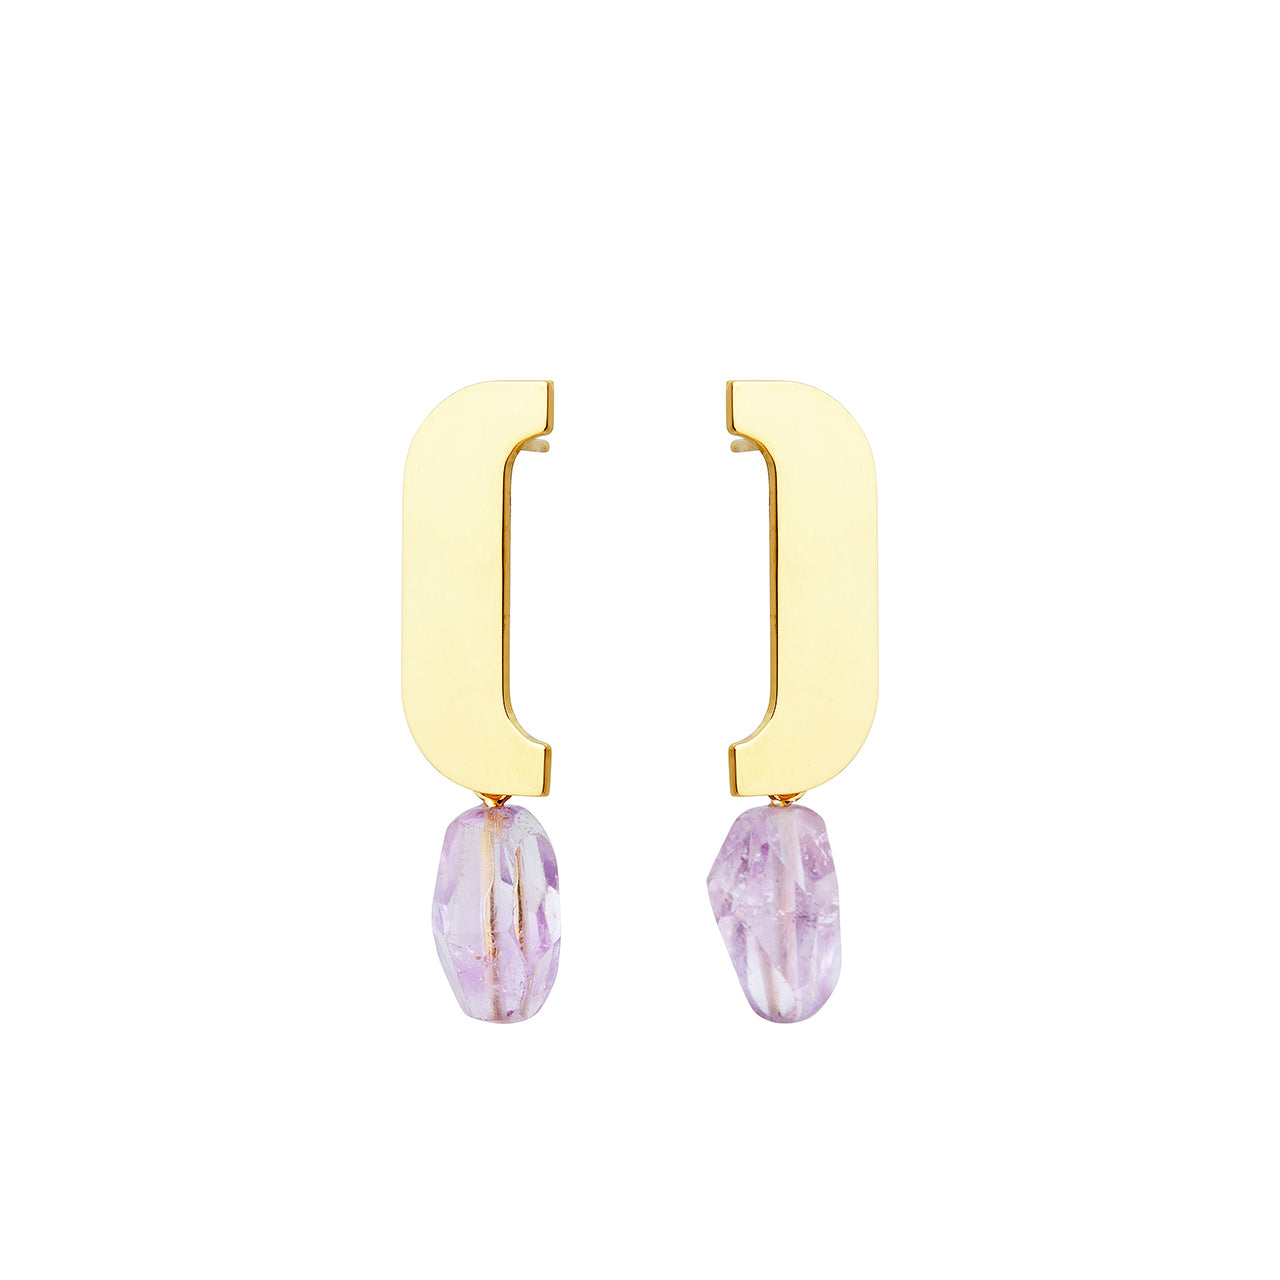 goldplated caps earrings with amethyst